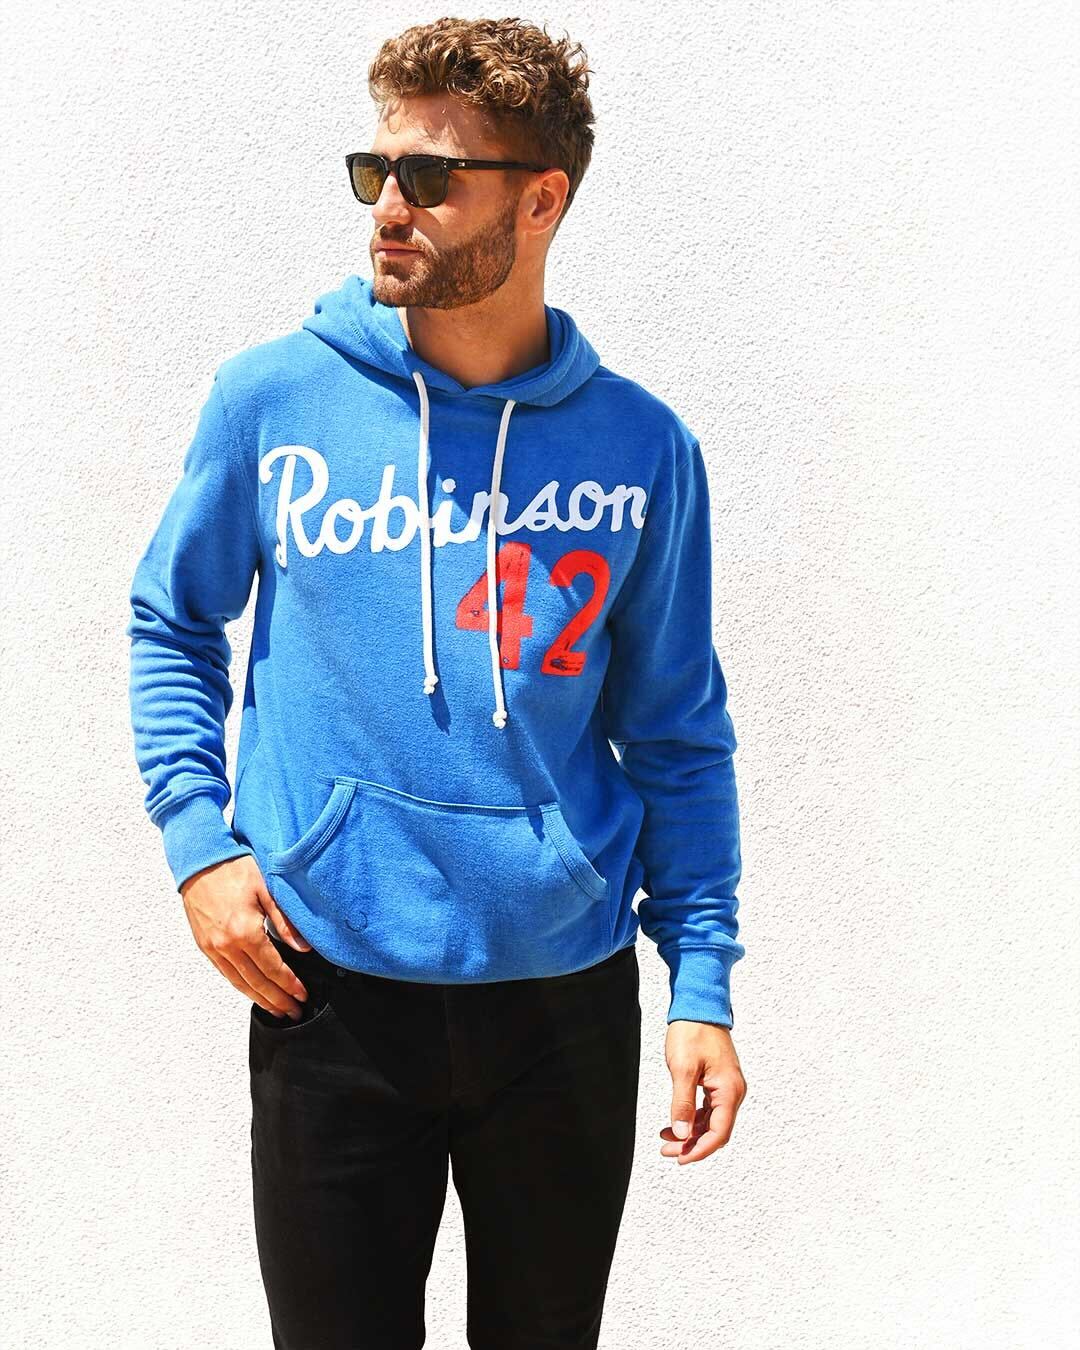 Jackie Robinson #42 Essential Blue Hoody - Roots of Fight